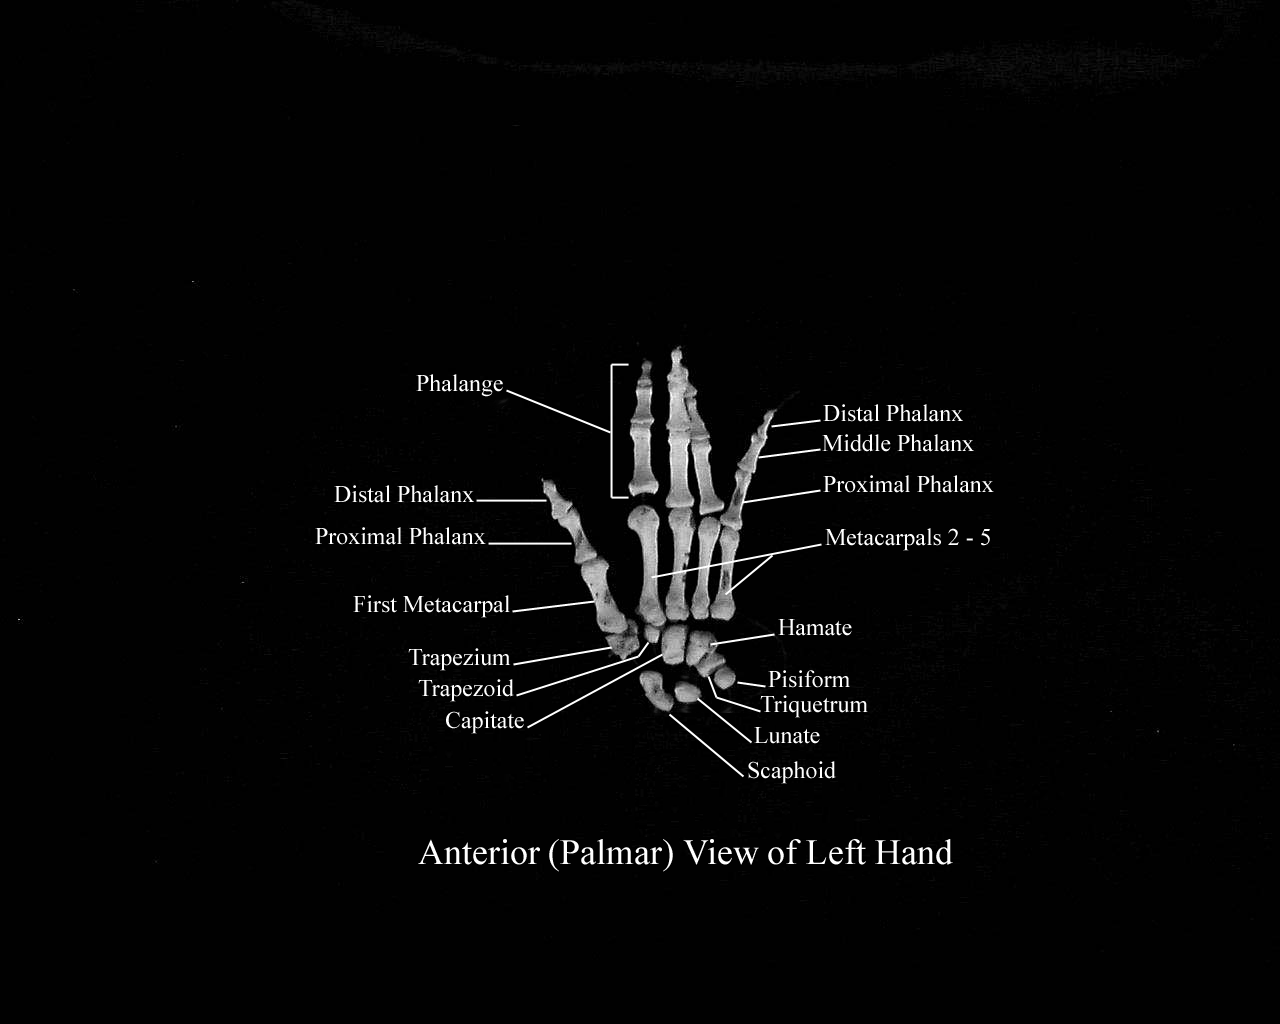 a labeled picture of the bones of the hand from a palmar view